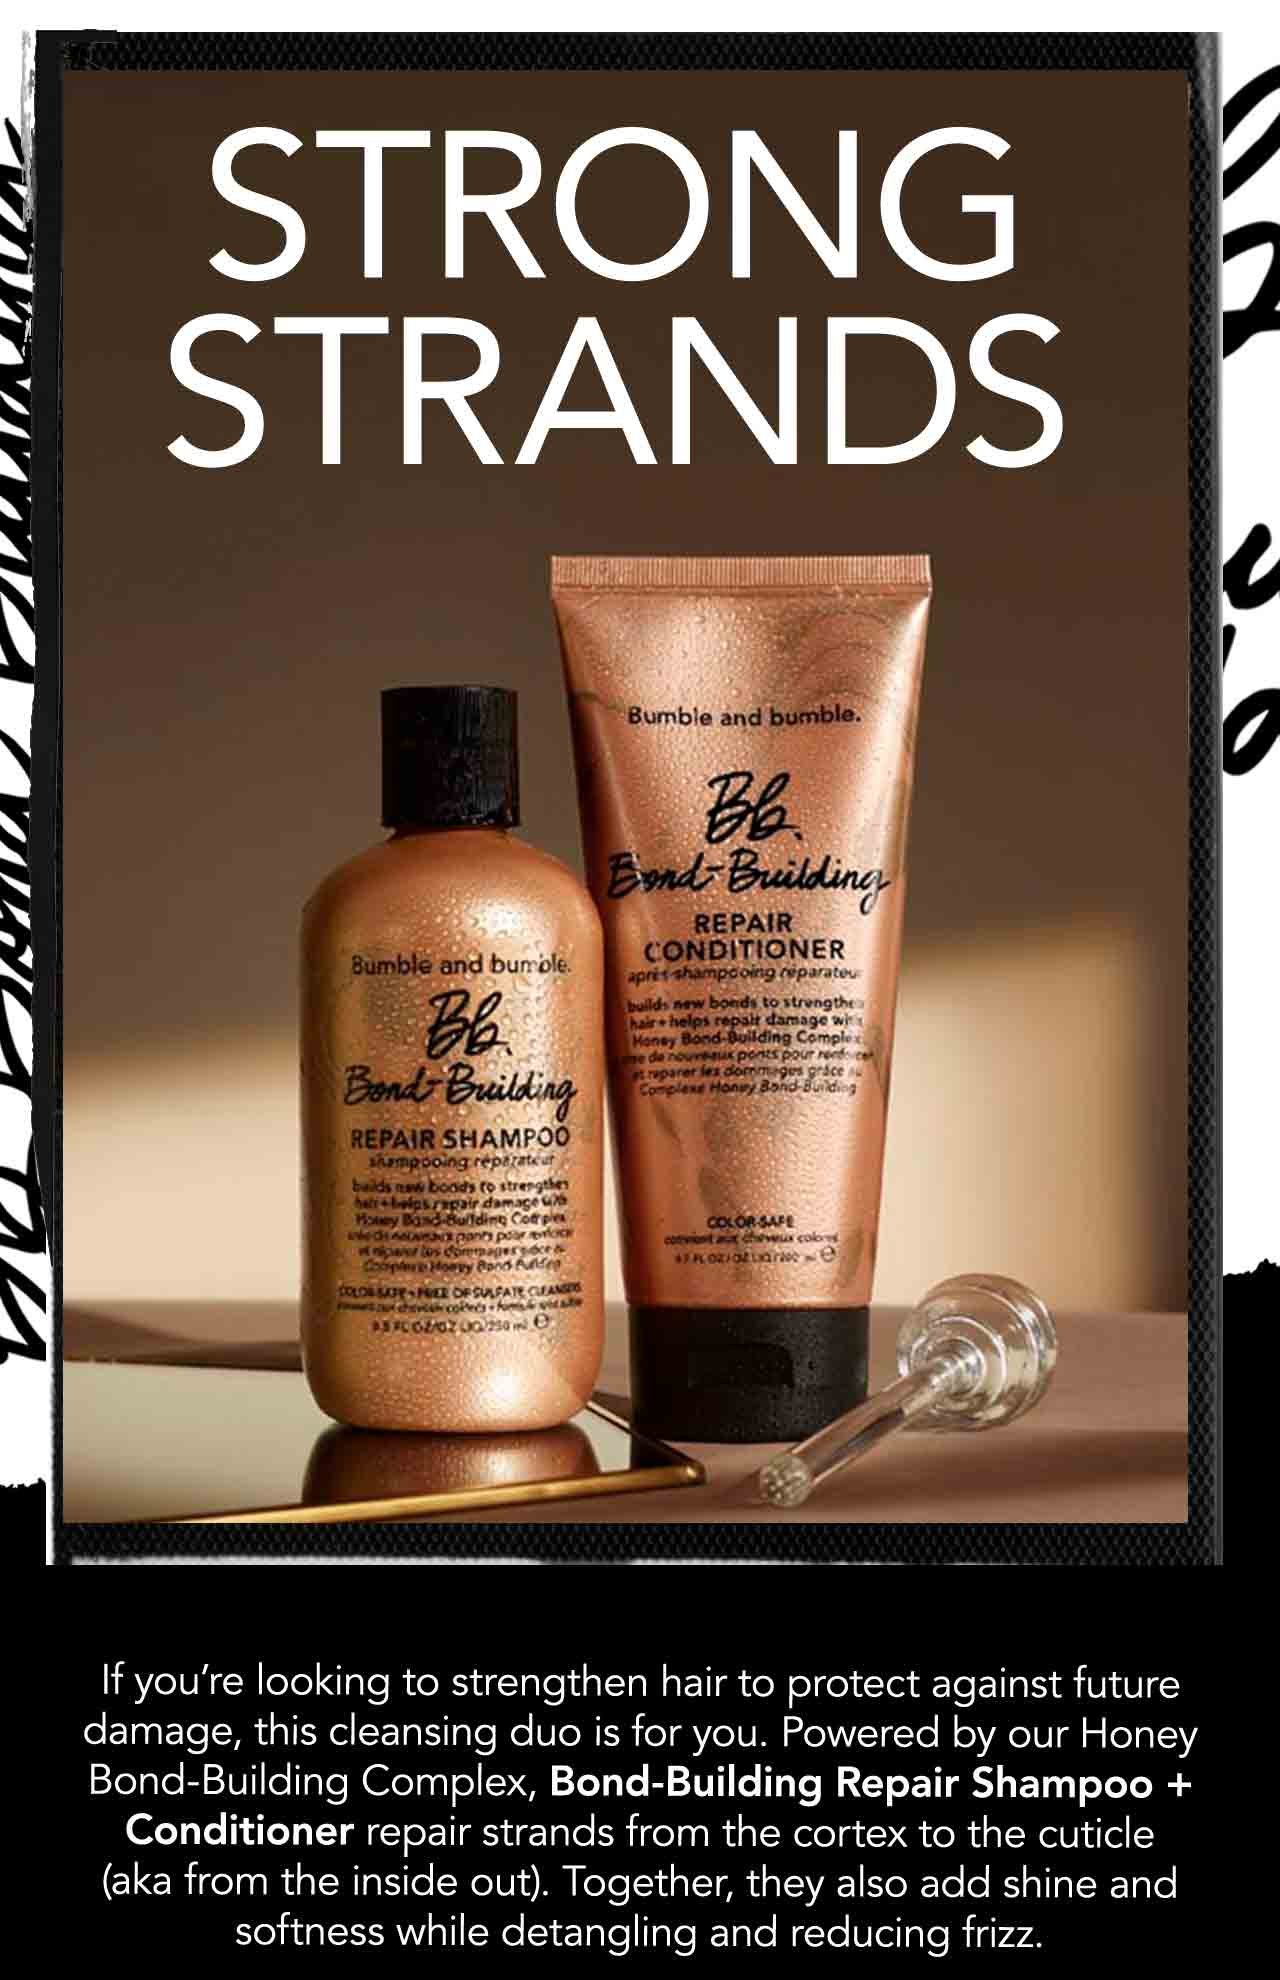 STRONG STRANDS | If you're looking to strengthen hair to protect against future damage, this cleansing duo is for you. Powered by our Honey Bond-Building Complex, Bond-Building Repair Shampoo + Conditioner repair strands from the cortex to the cuticle (aka from the inside out). Together, they also add shine and softness while detangling and reducing frizz.